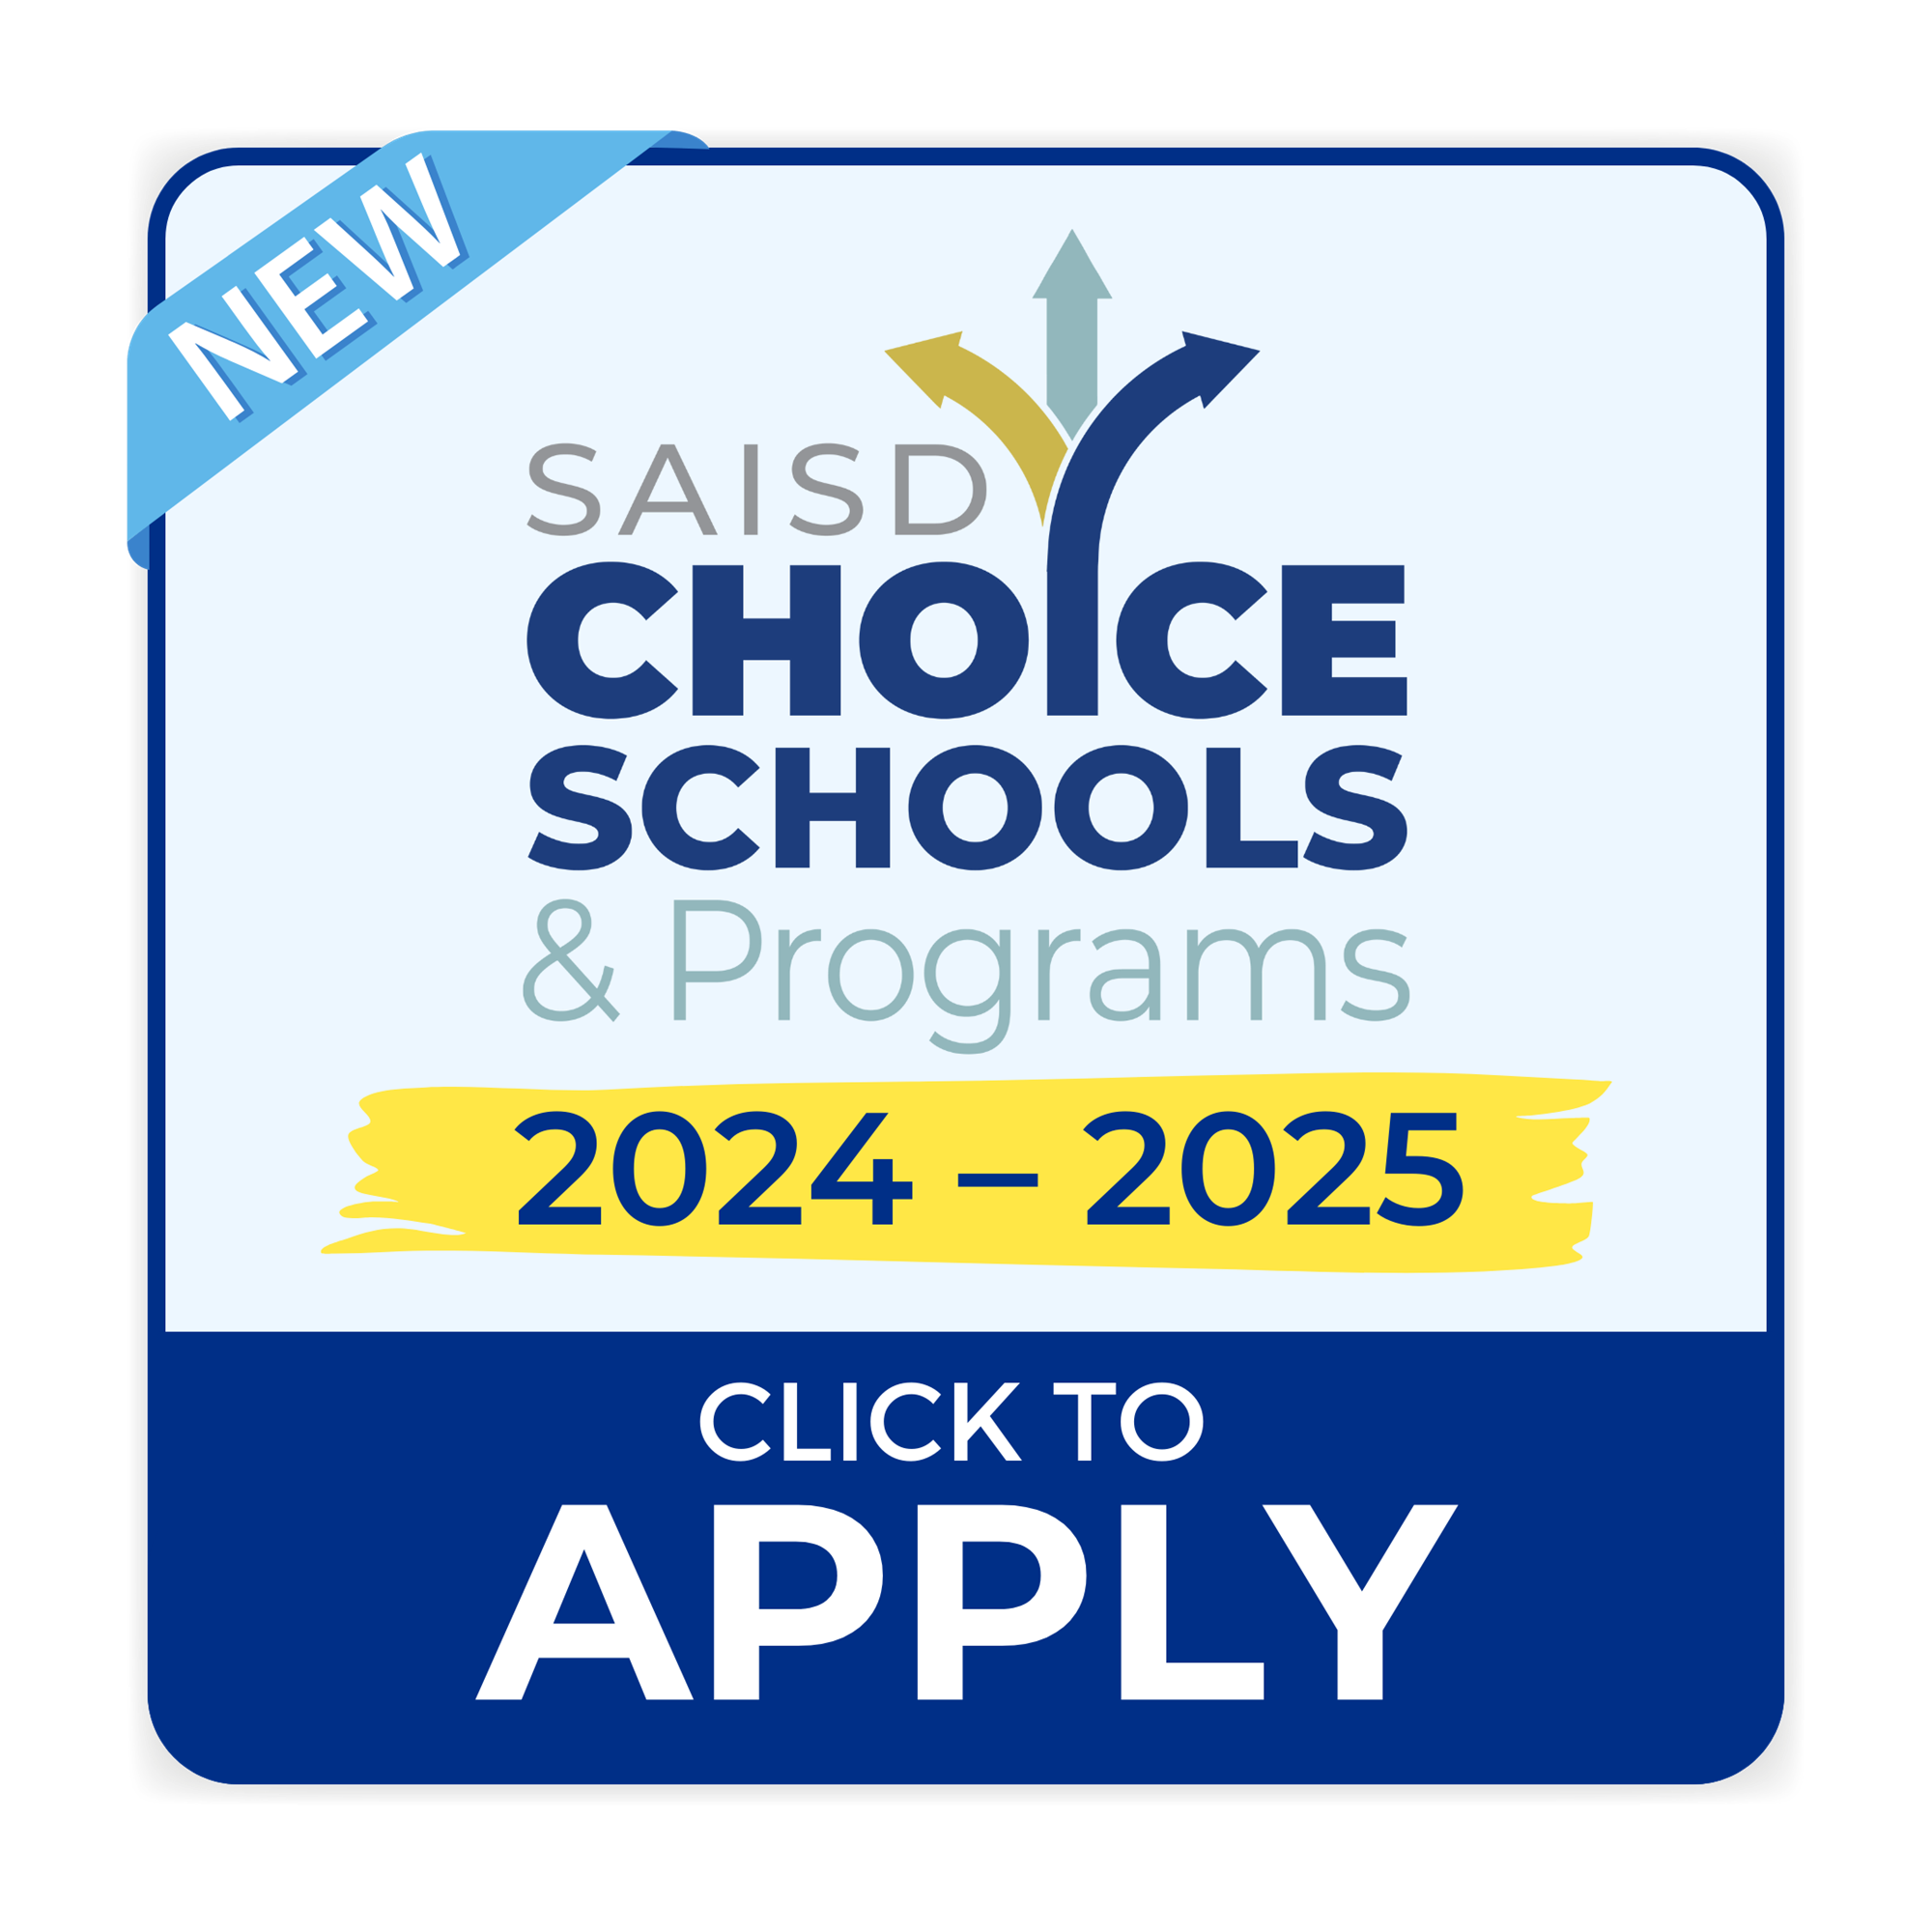 Apply to Choice Schools 24-25